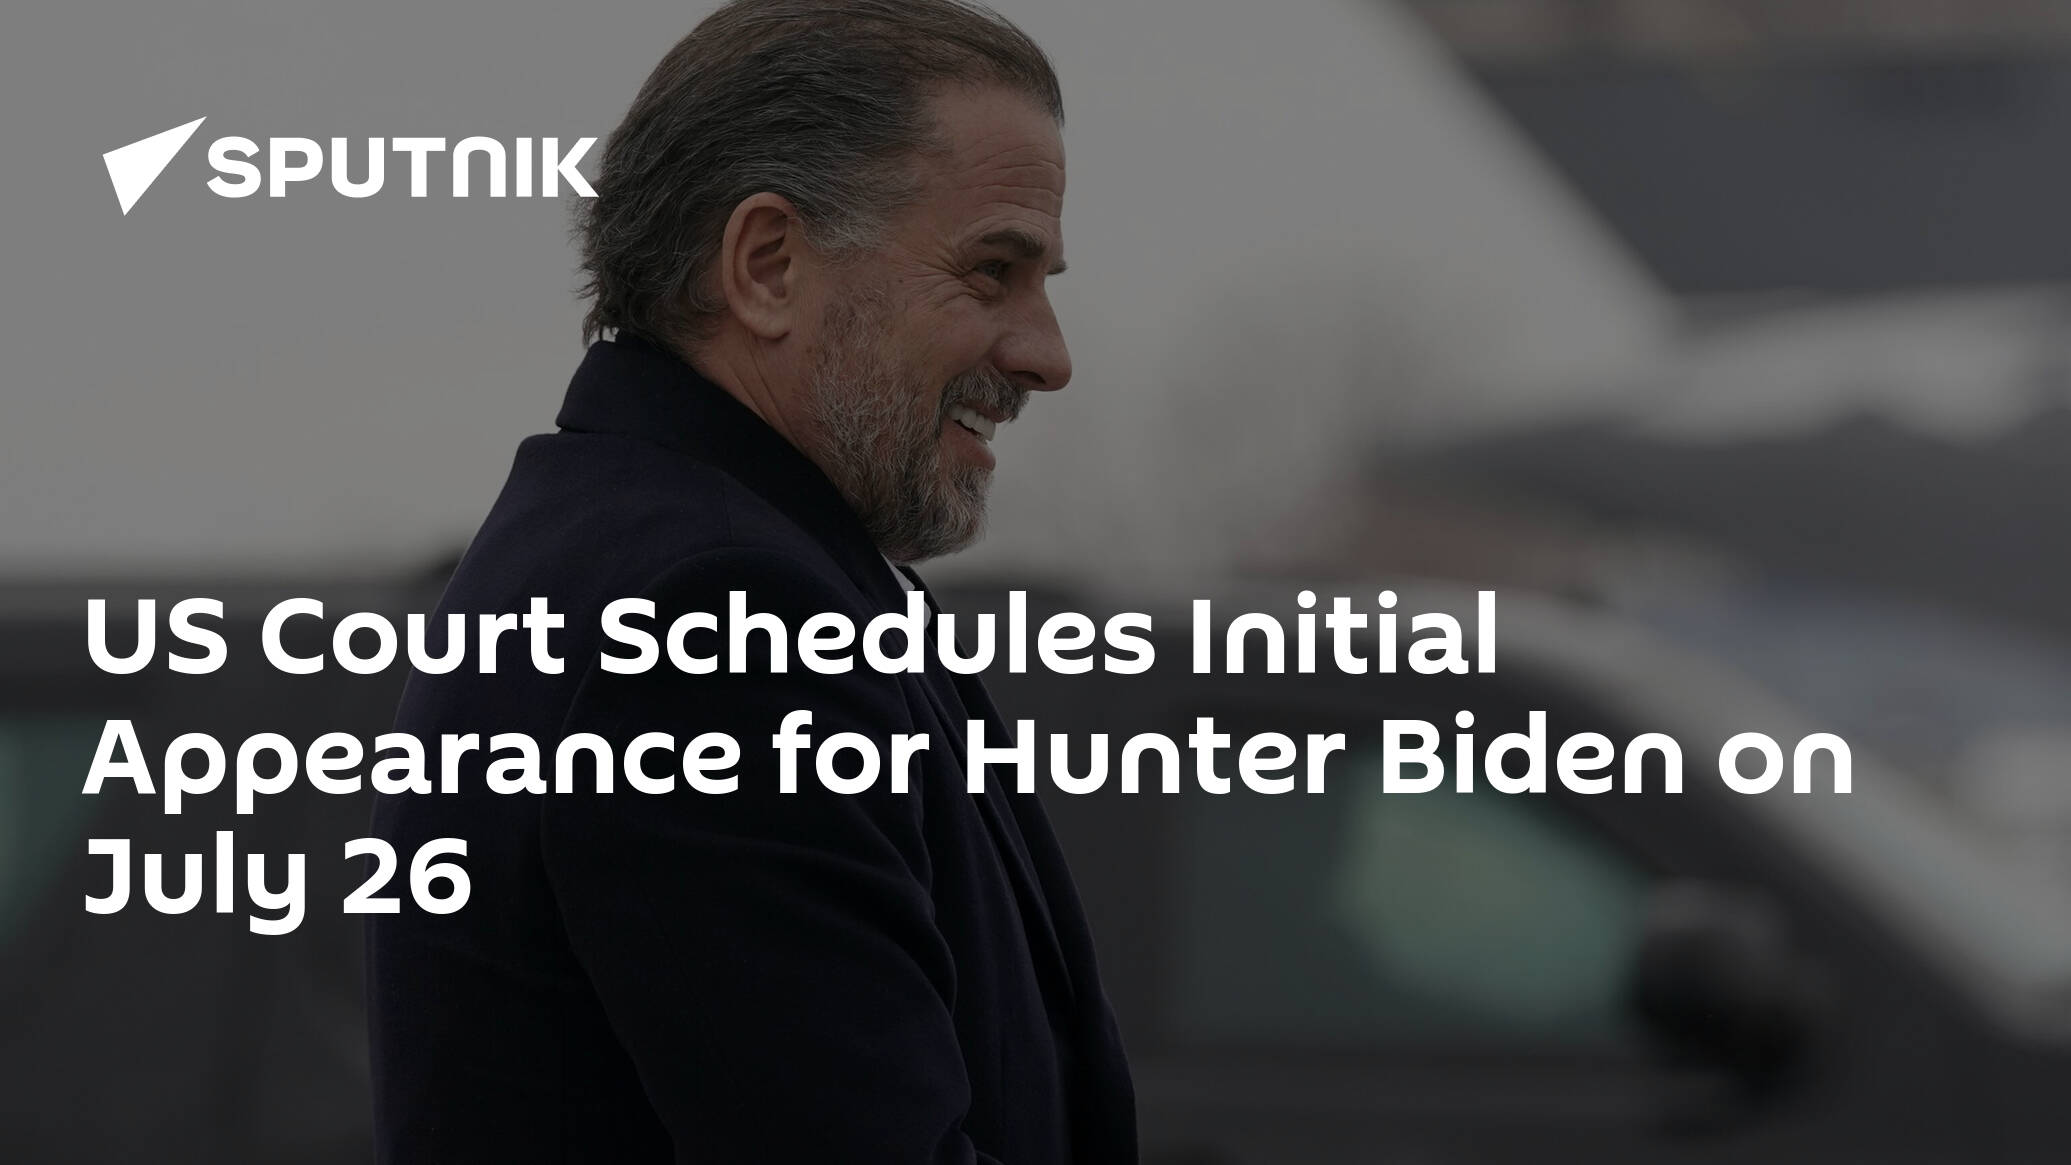 US Court Schedules Initial Appearance for Hunter Biden on July 26